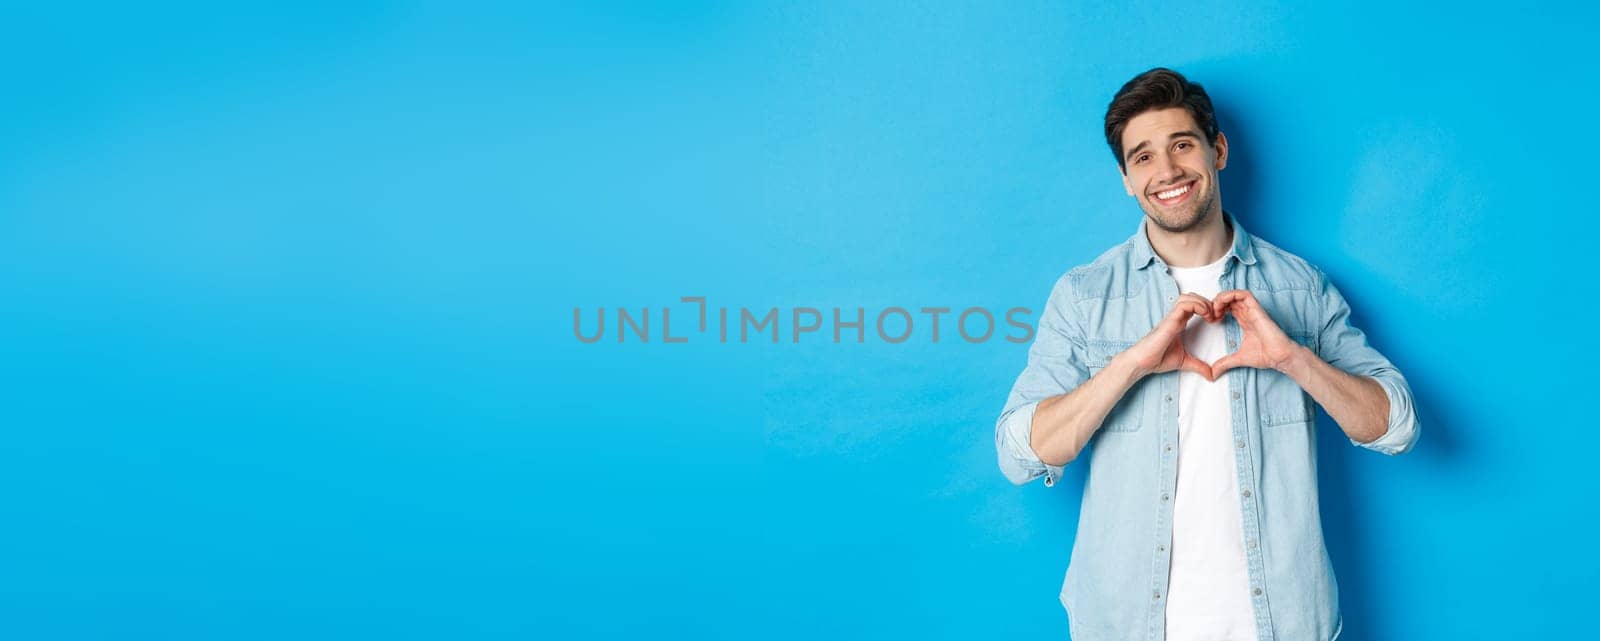 Handsome man smiling, showing heart gesture and looking at camera, saying I love you, standing against blue background.